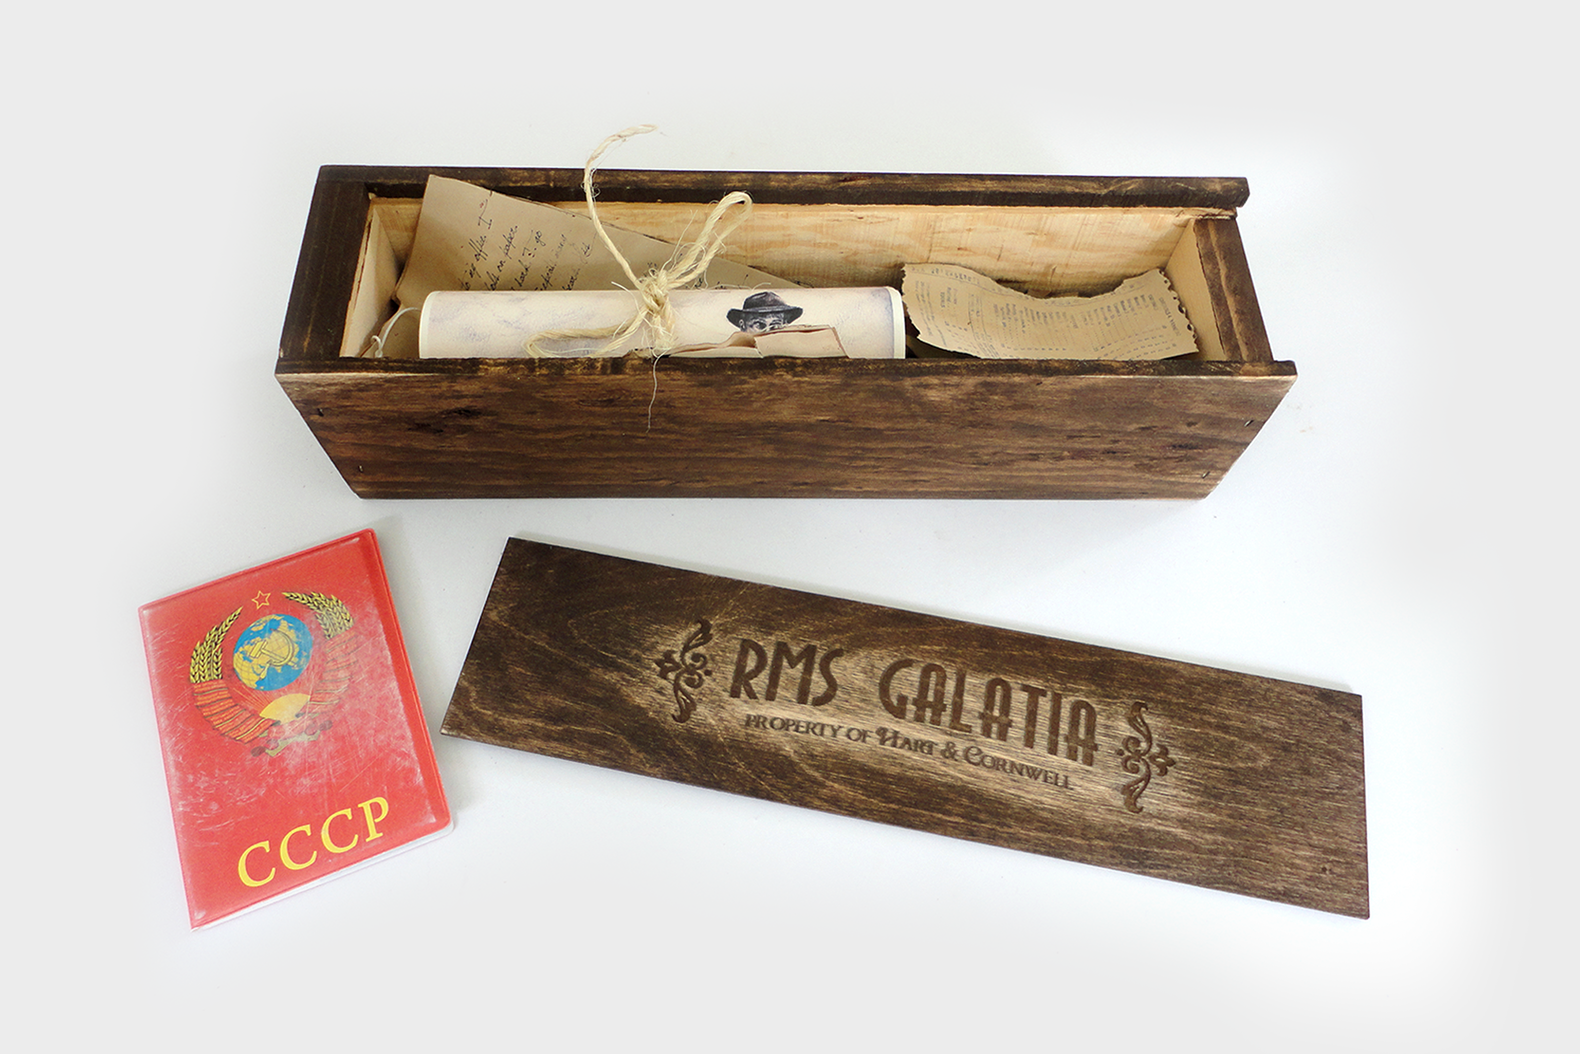 An image of a box that says RMS Galatia. Inside the box is a painting and various scraps of old paper documents, alongside a passport from the Soviet Union from the Blackhollow Project experience.